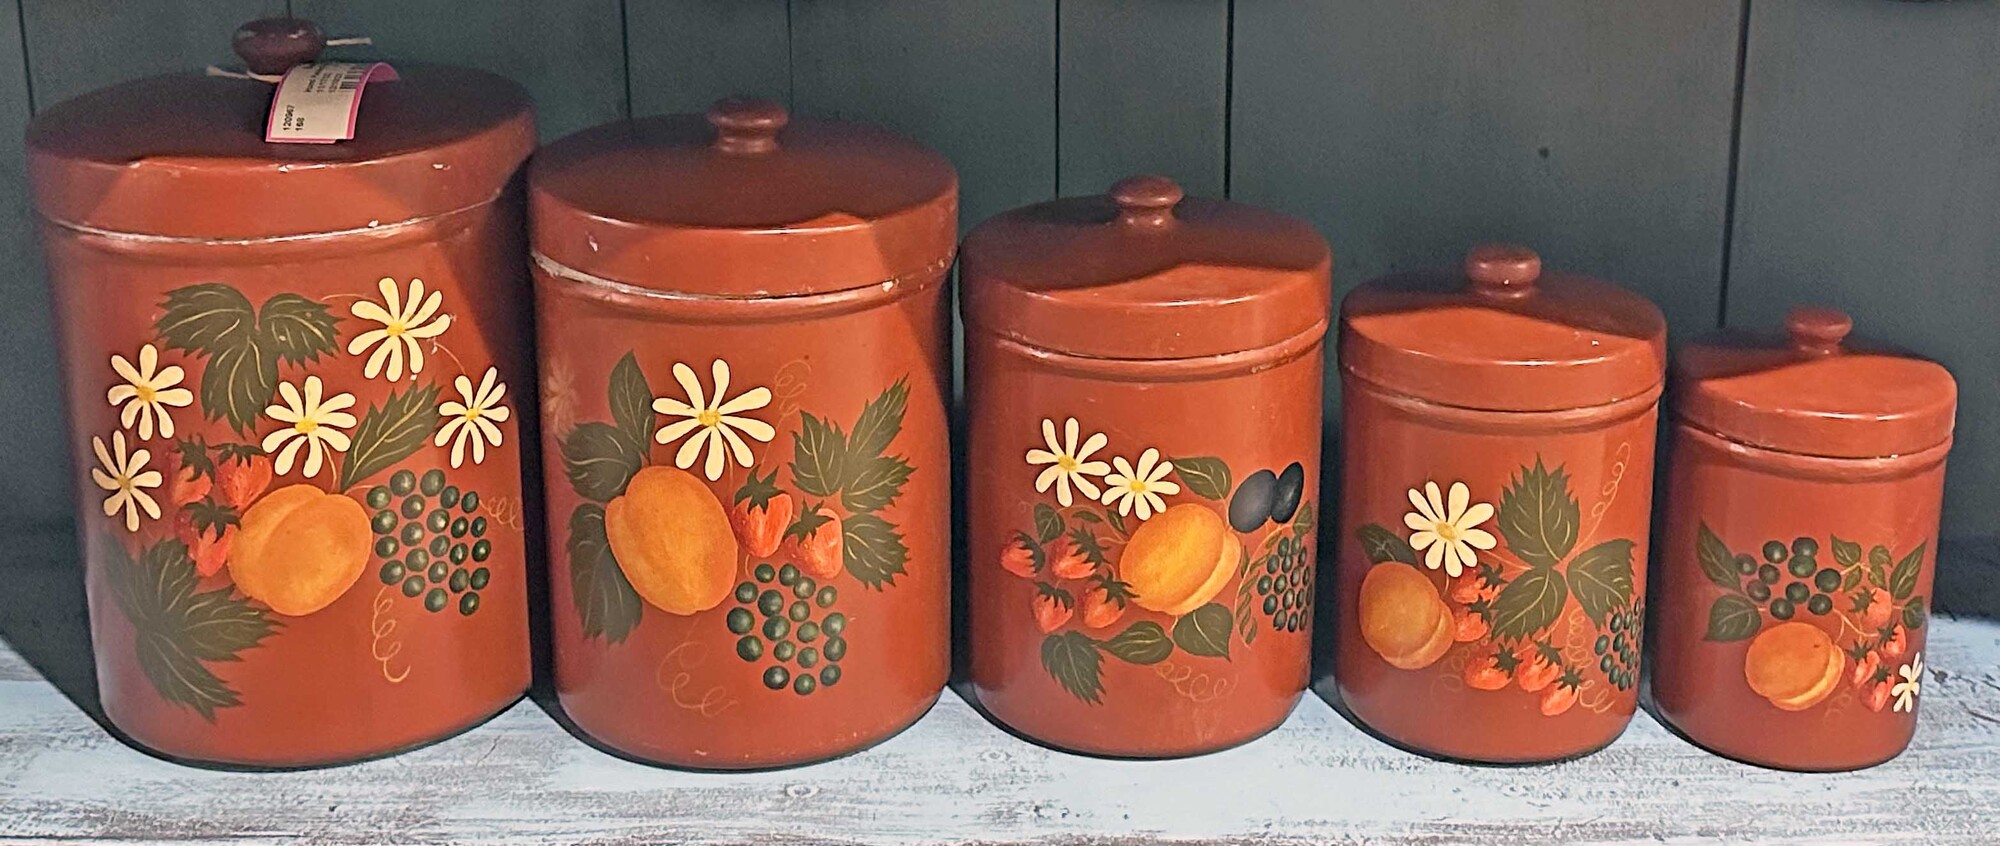 Hand Painted Canister Set
5 Canisters